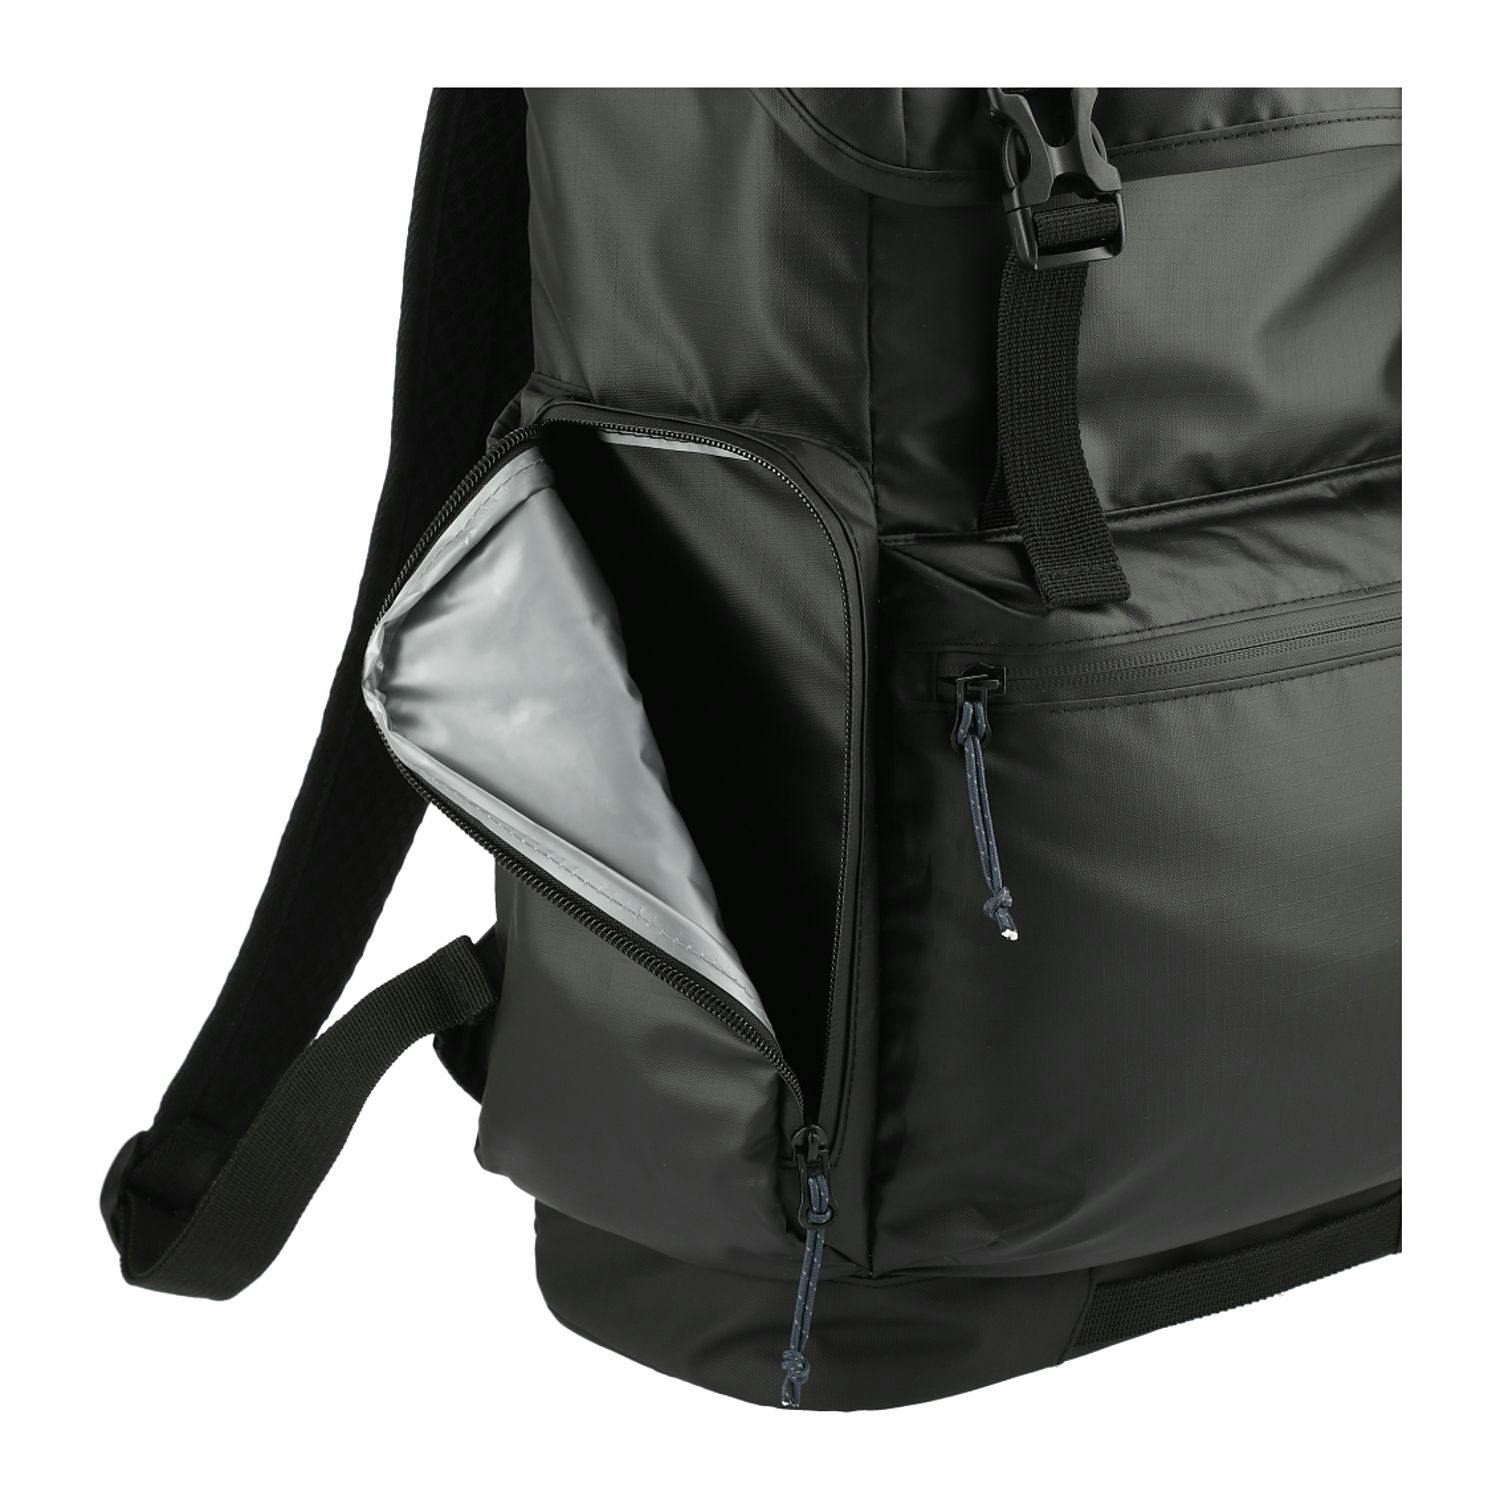 NBN Recycled Outdoor Rucksack - additional Image 2